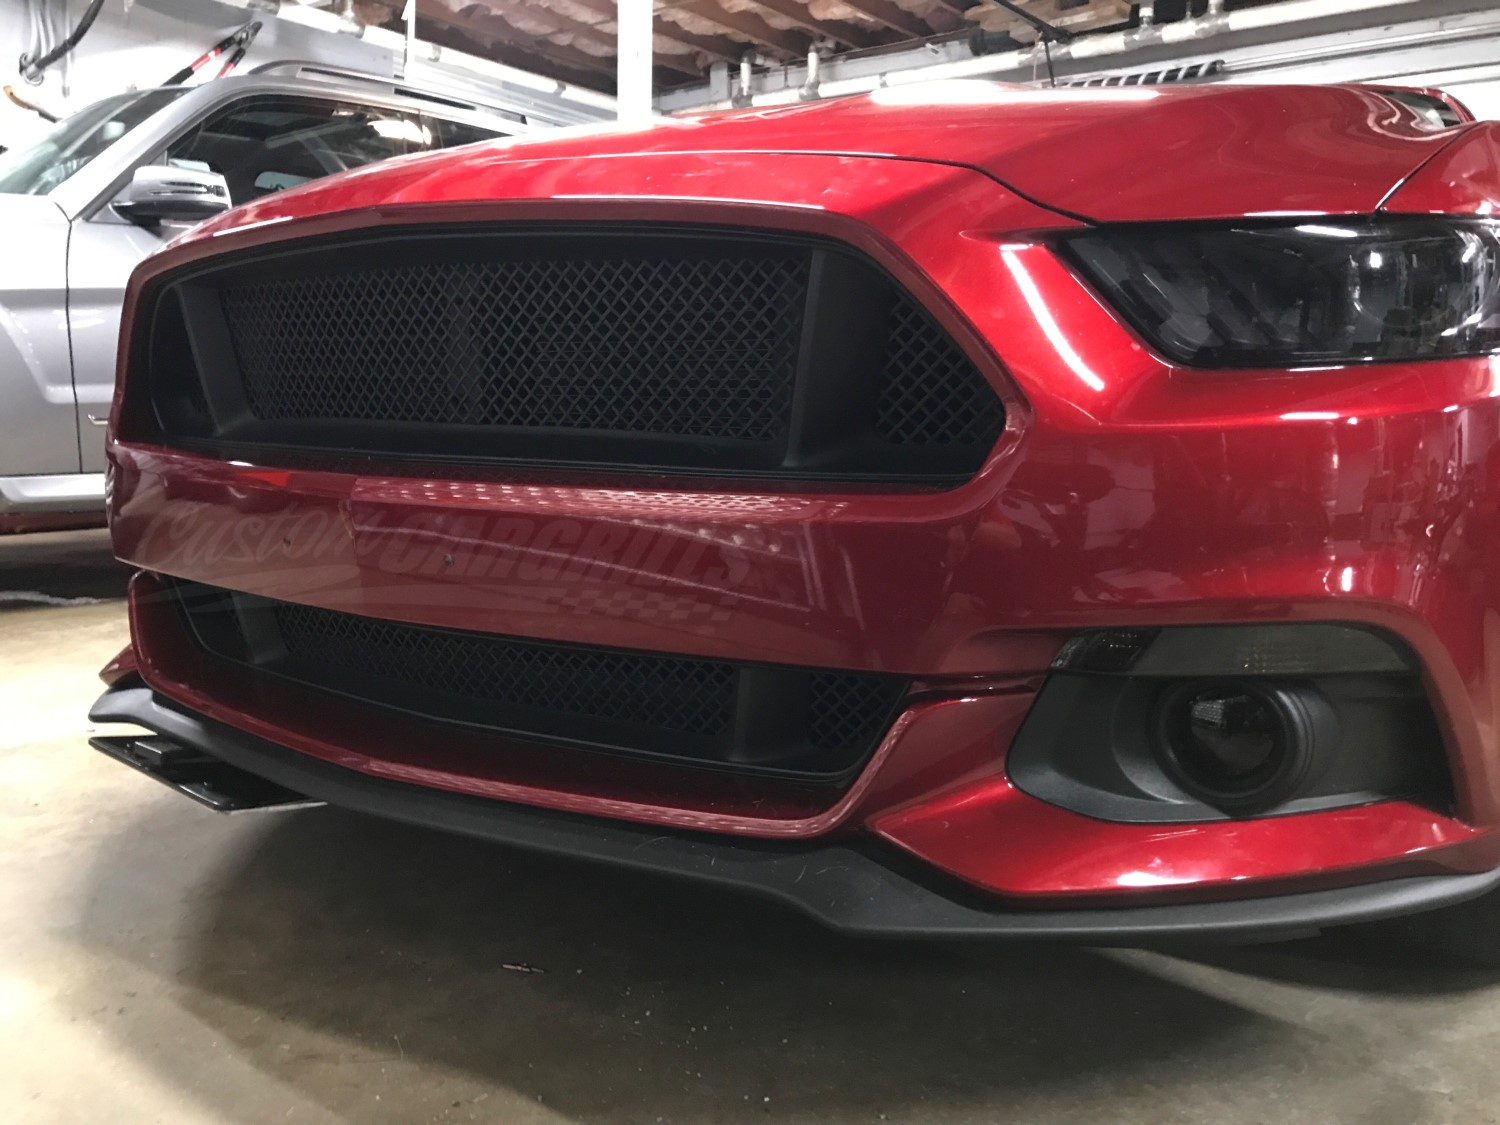 Woven Mesh Grill Kit for 2015 - 2017 Ford Mustang GT #4